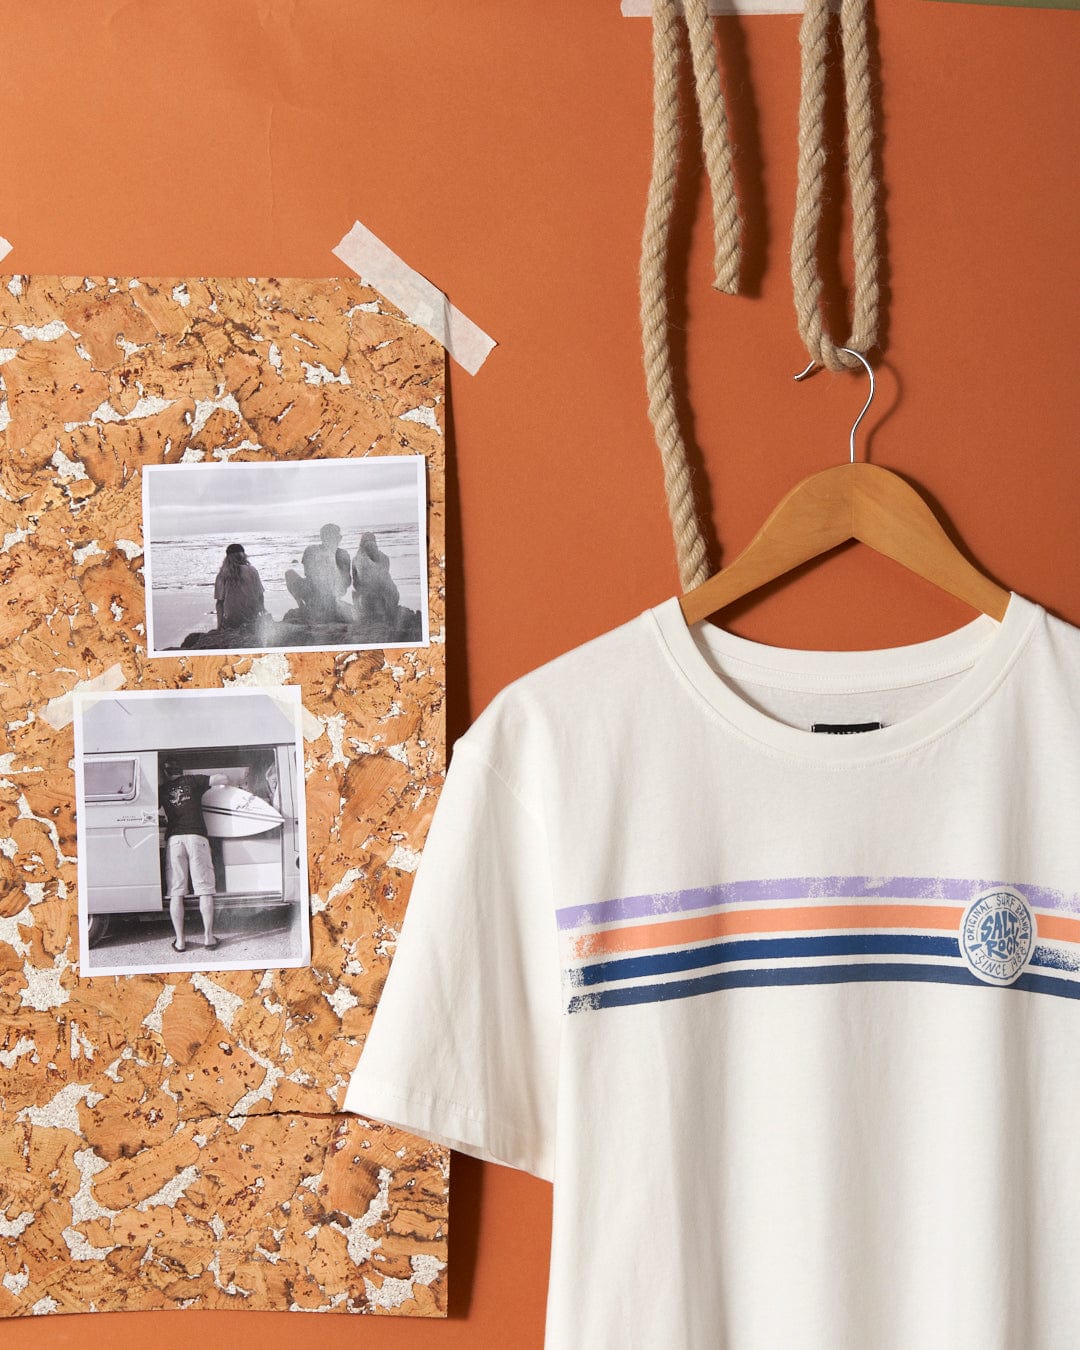 A white Spray Stripe - Mens Short Sleeve T-Shirt - White with colorful stripes and Saltrock branding on a hanger is displayed beside a corkboard with two black-and-white photographs, all against an orange background with a coiled rope hanging above.